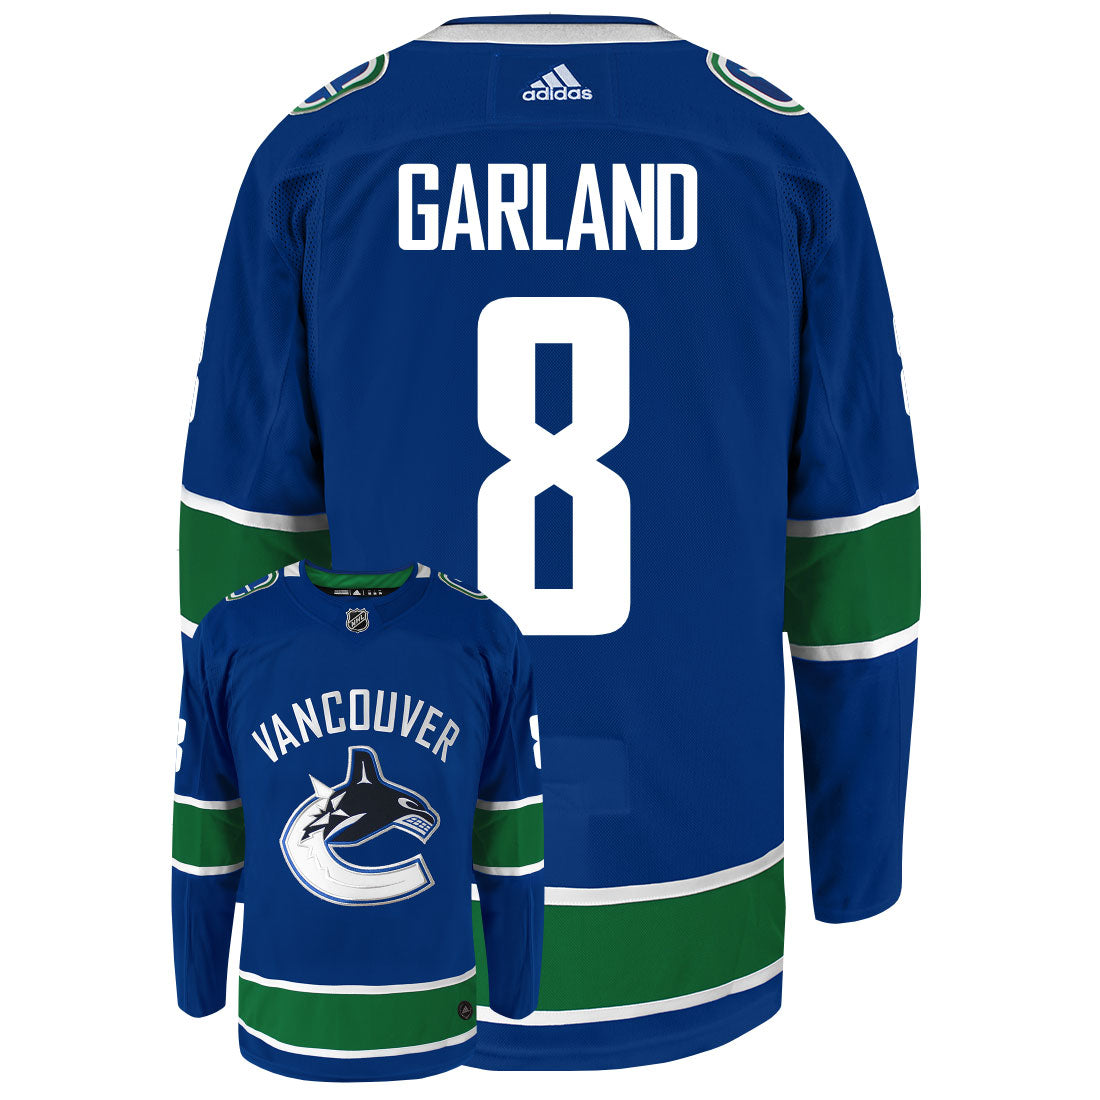 Conor Garland Vancouver Canucks Adidas Primegreen Authentic NHL Hockey Jersey